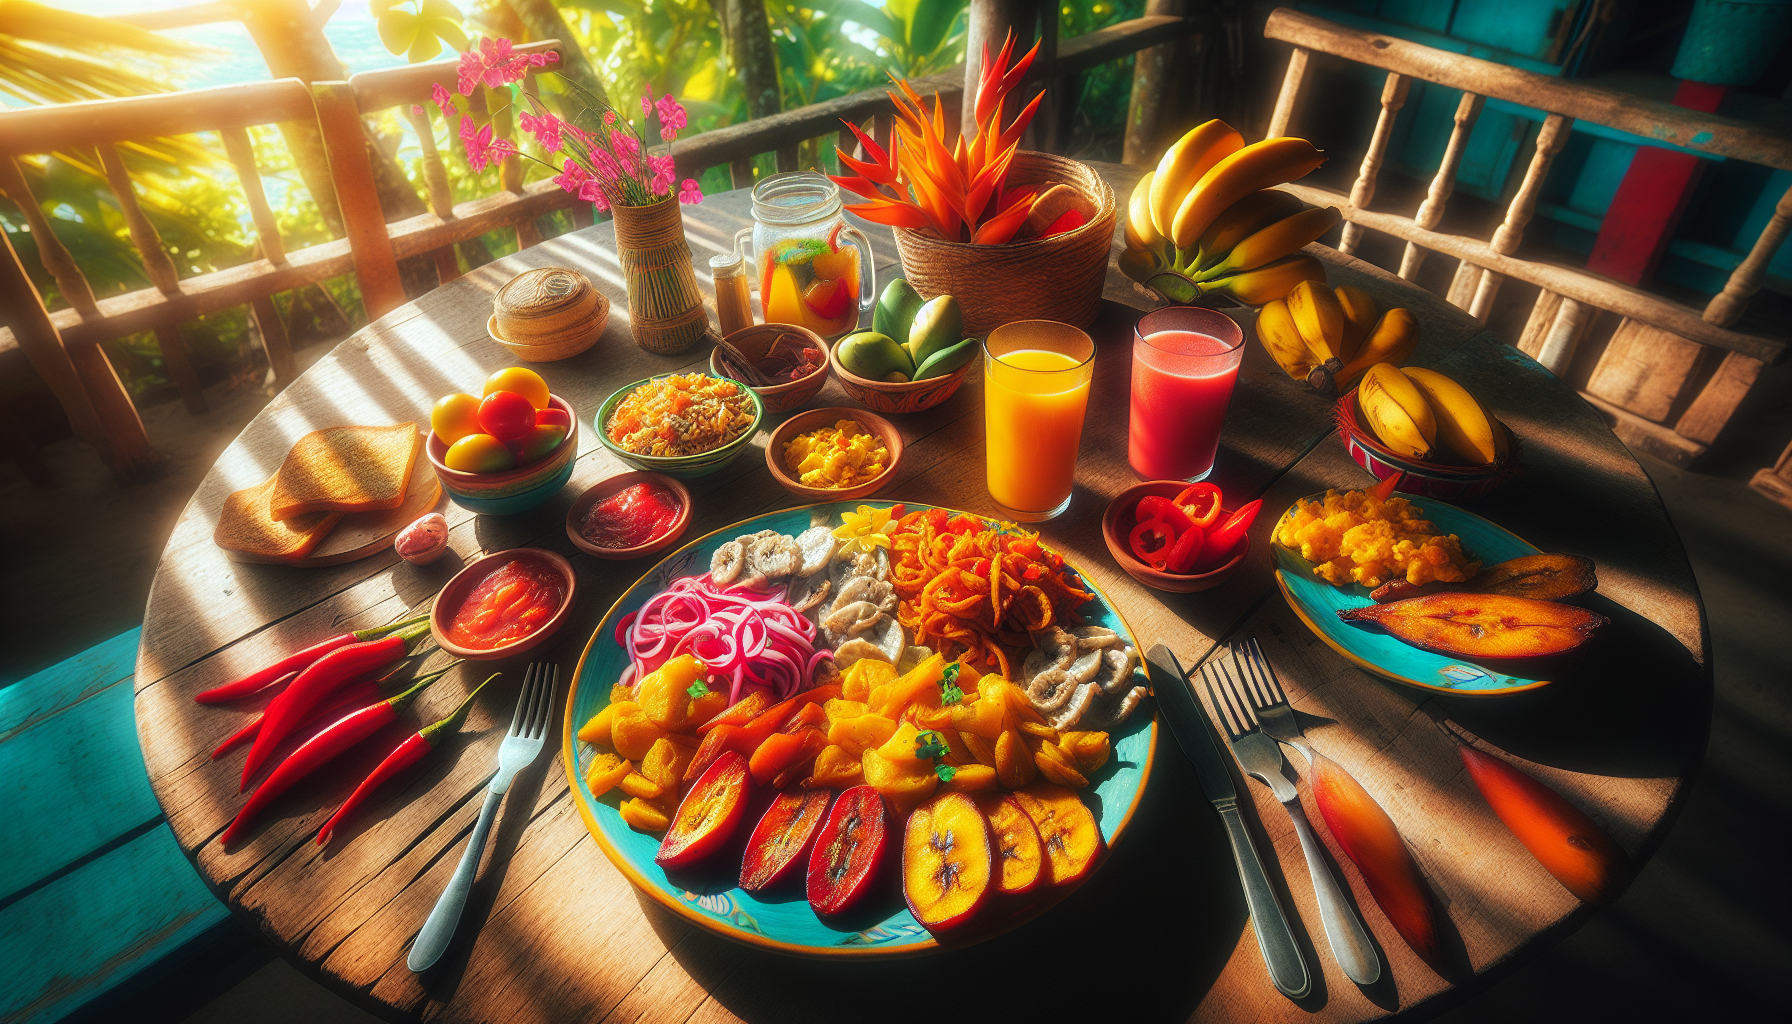 Share A Caribbean-inspired Breakfast Recipe For A Tropical Morning.